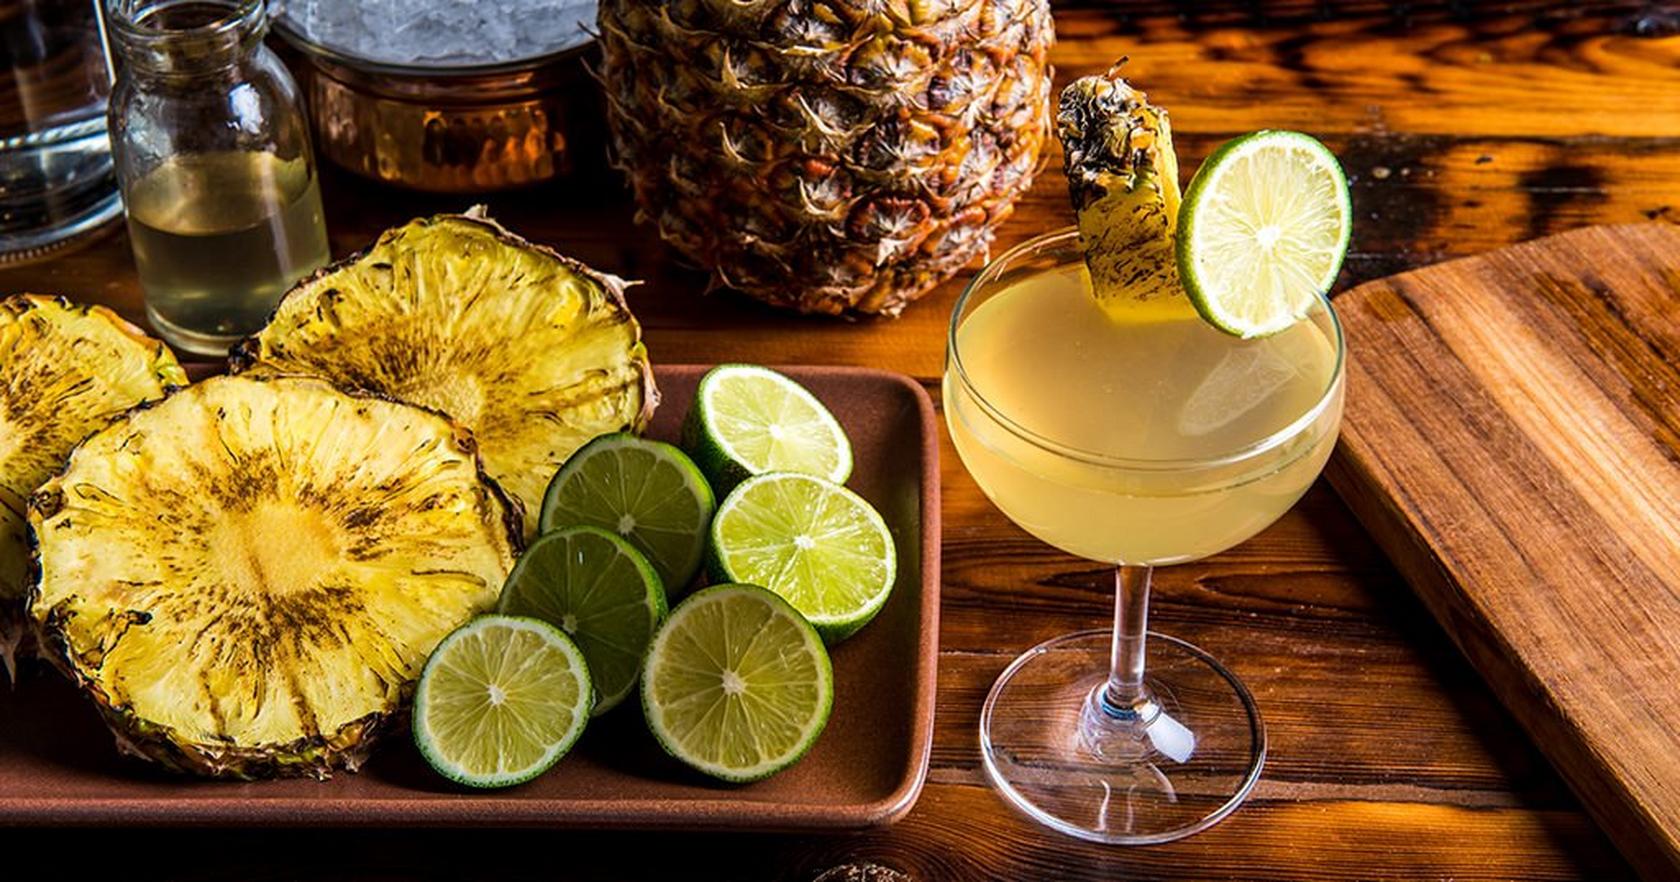 Smoked Pineapple Hotel Nacional Cocktail By Jeffrey Morgenthaler